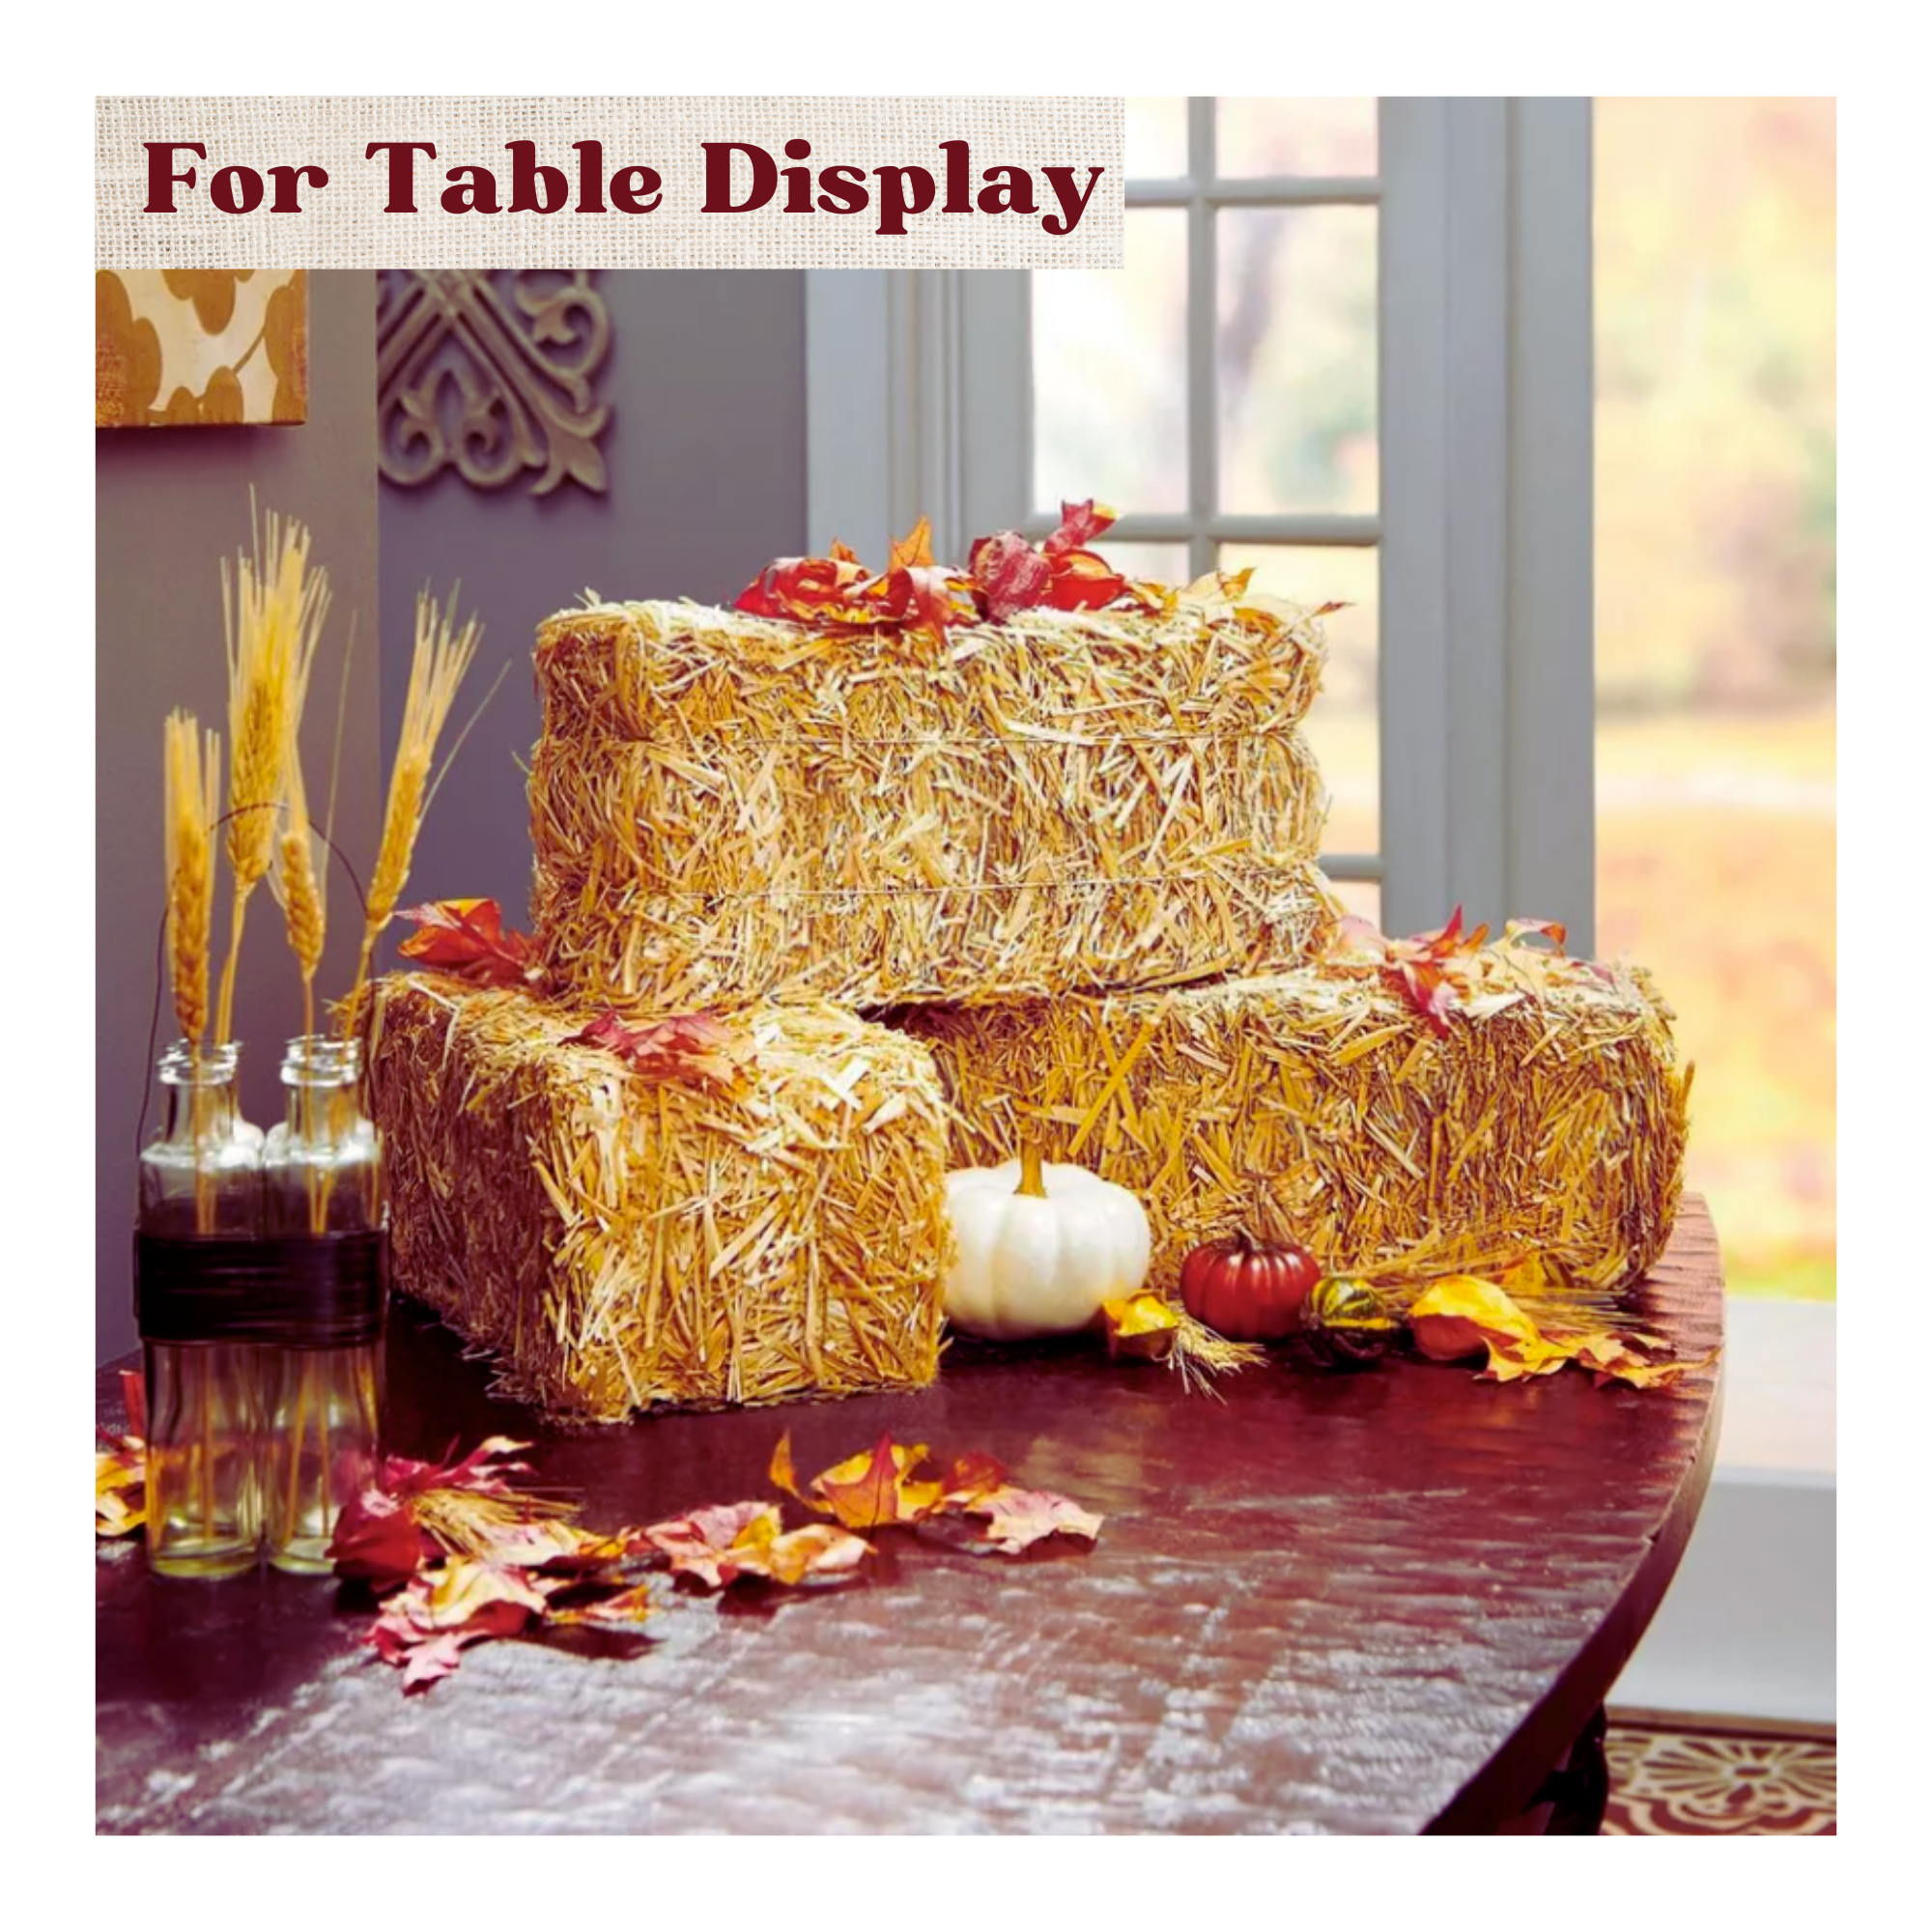 CGT Mini Straw Bales Natural Hay Crafting Projects Table Decoration Mantel Display Faux Rectangular Autumn Fall Harvest Halloween Christmas Farmhouse